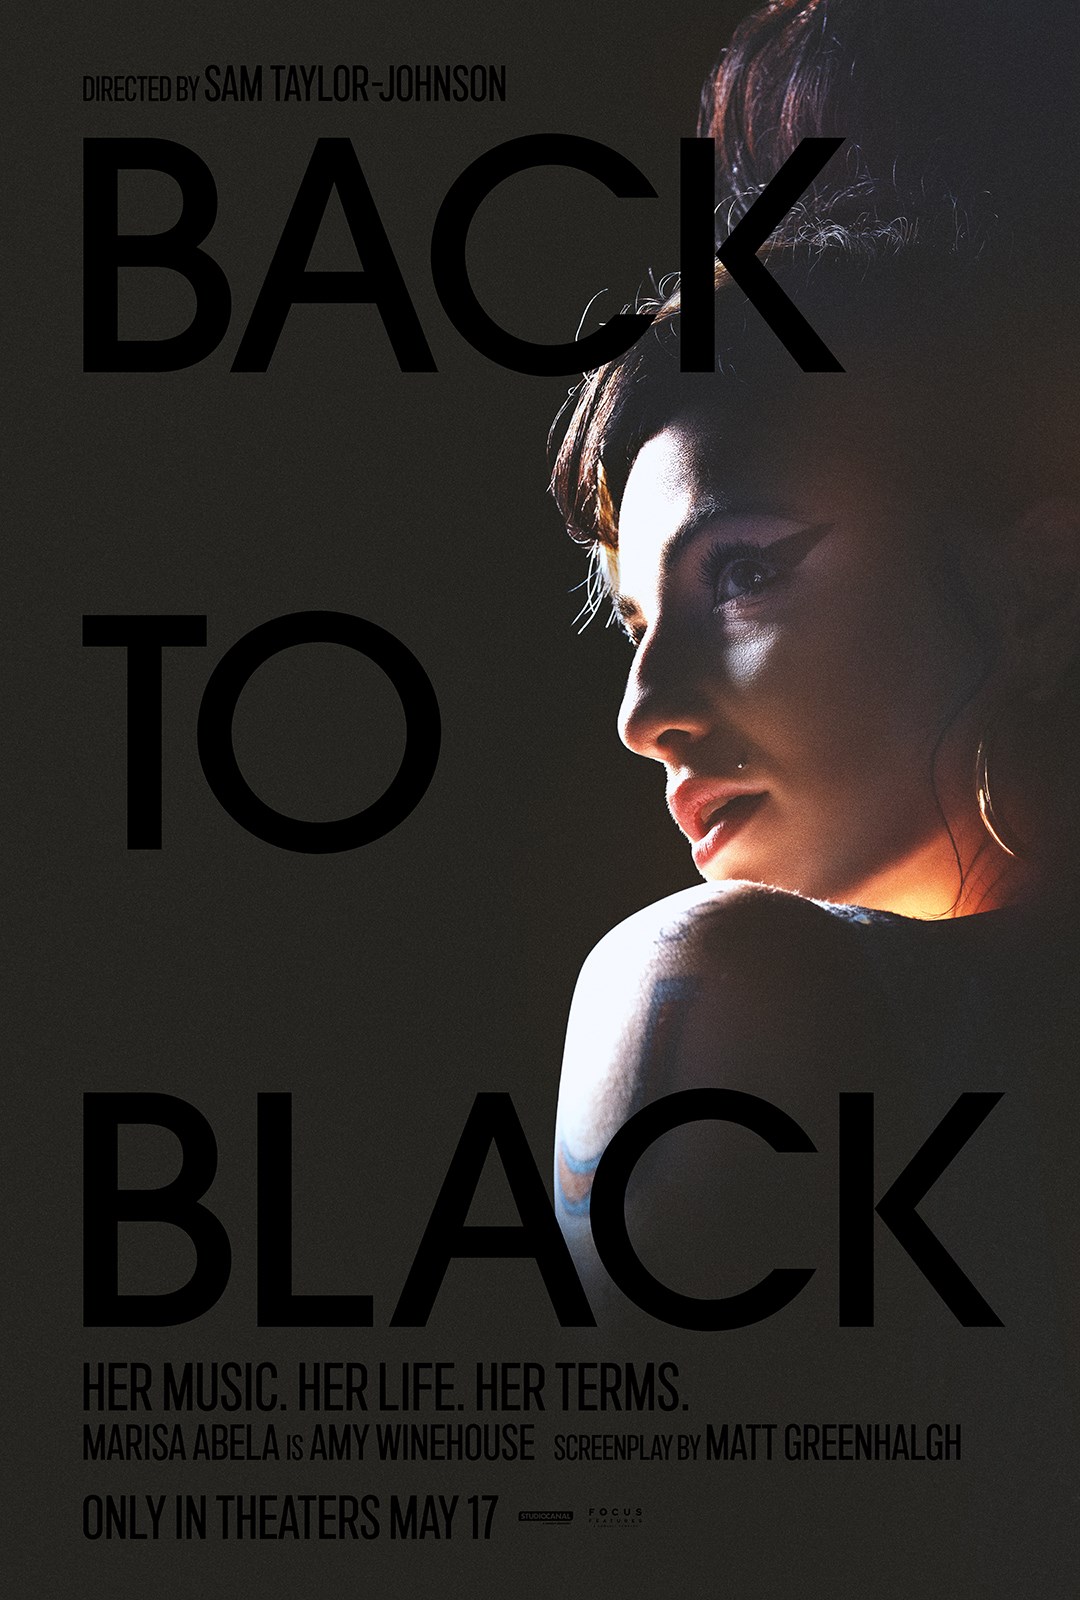 Back to Black Early Access Screening Poster